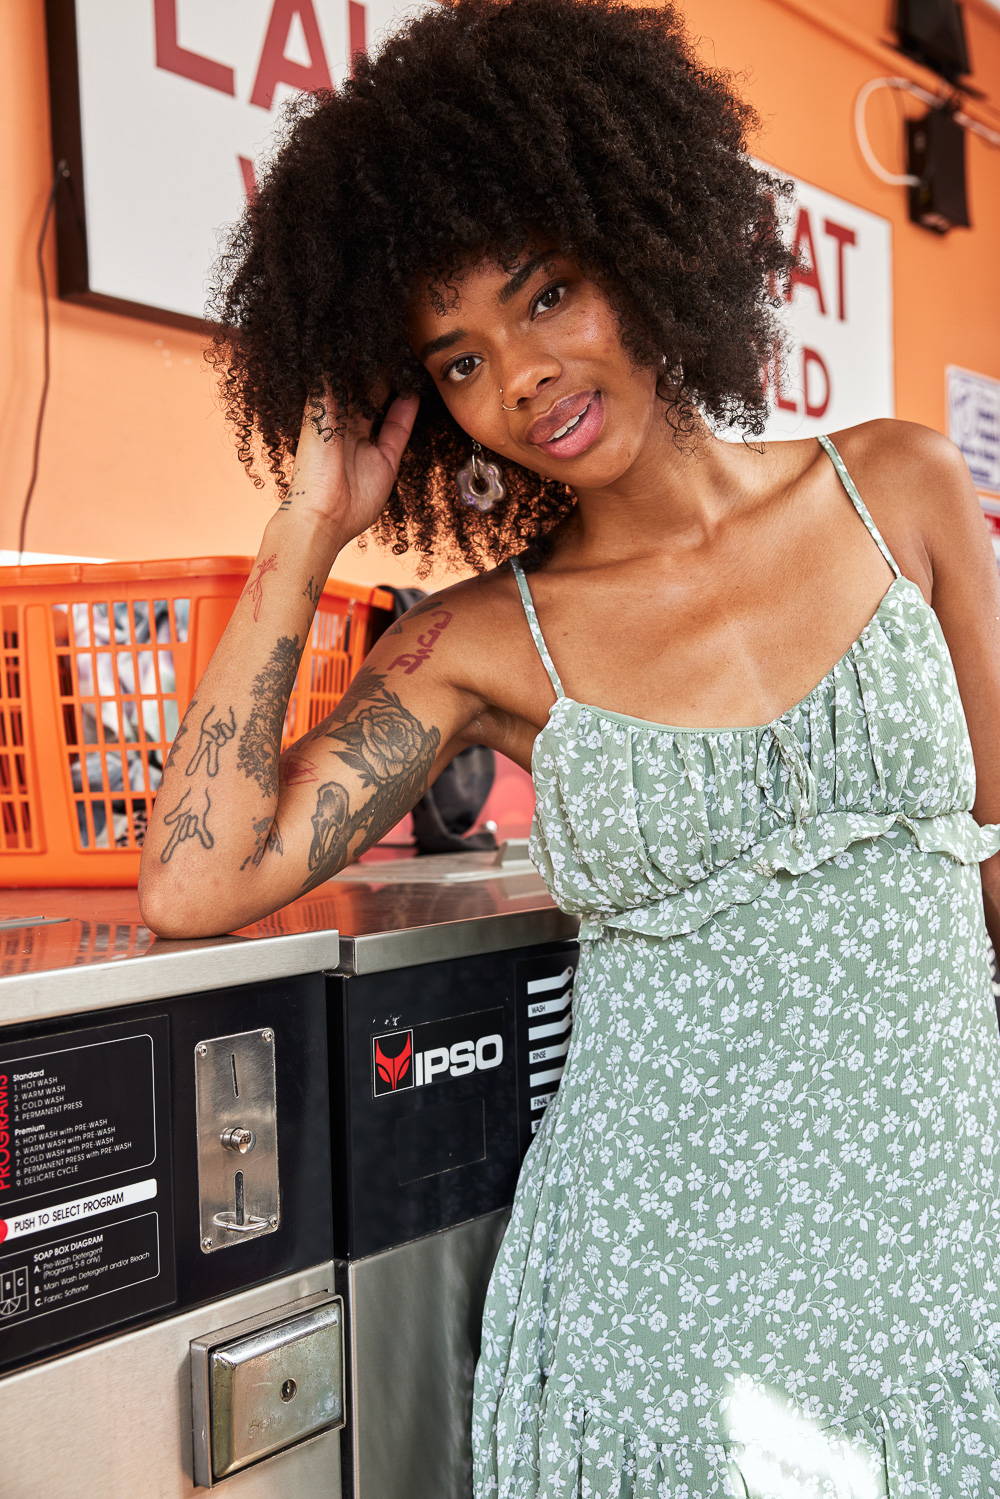 Trixxi Back to school embracing dorm life doing laundry in a laundromat in a sage green floral ruffle dress.